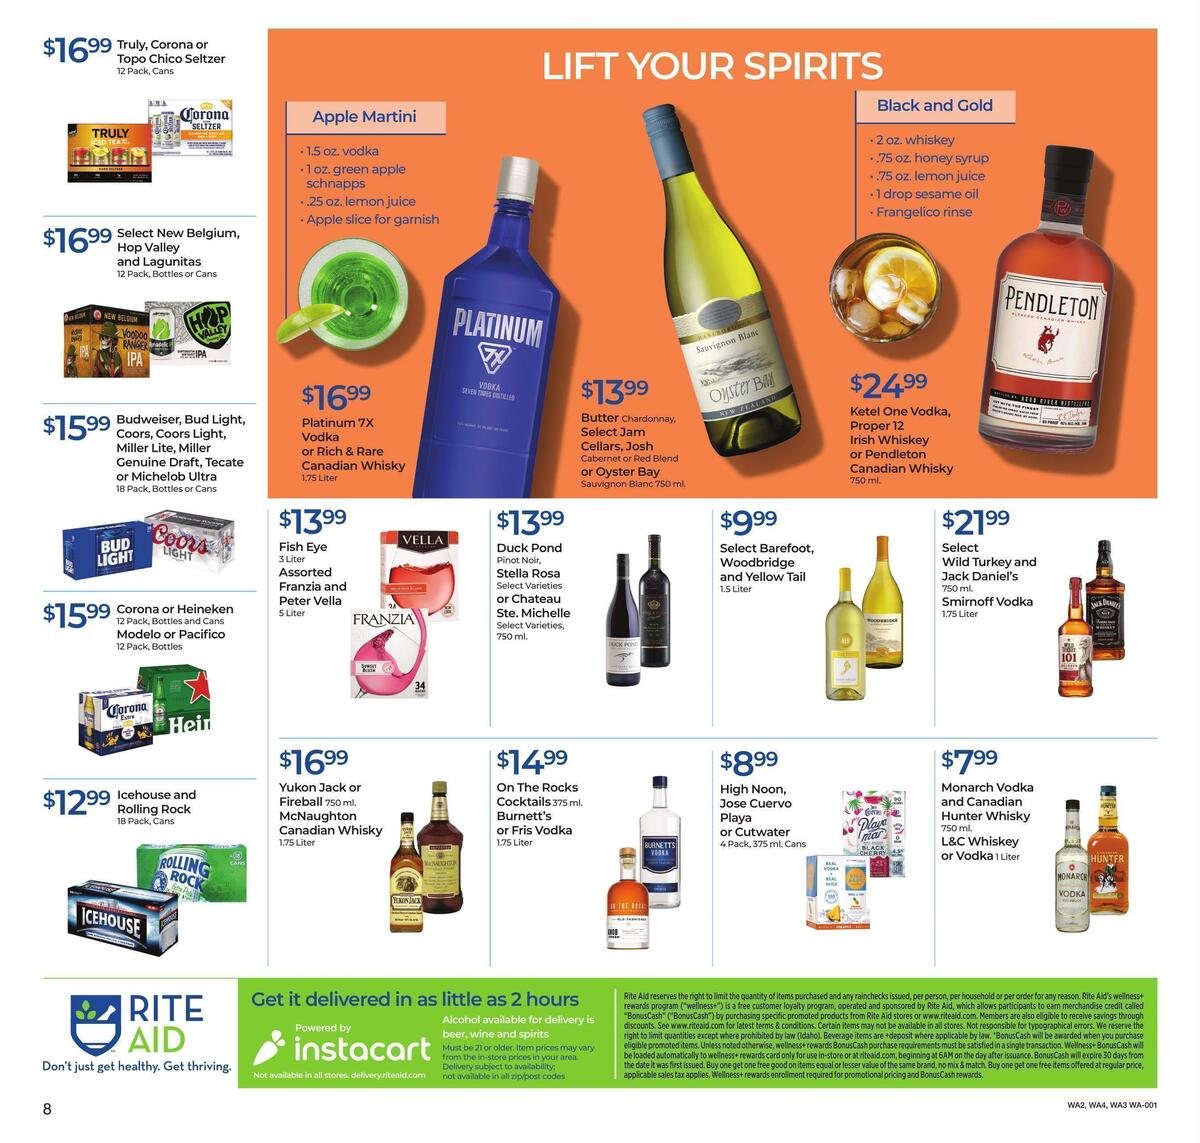 Rite Aid Weekly Ad from September 26